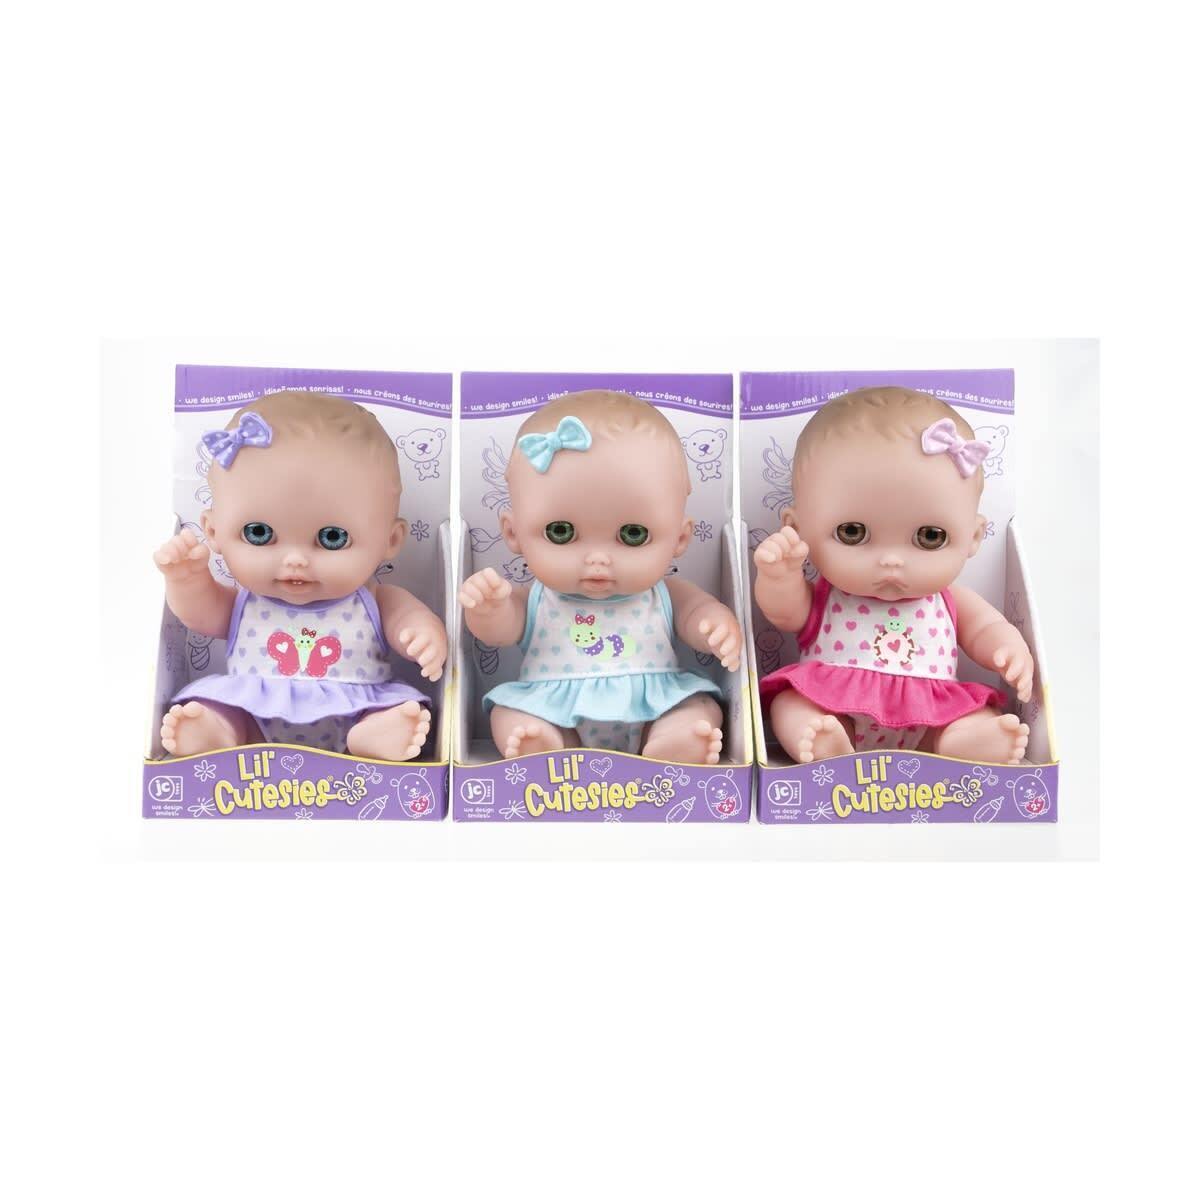 JC Toys Cutesies Doll Playsets Assorted, 8.5 inches, 16936 1pc